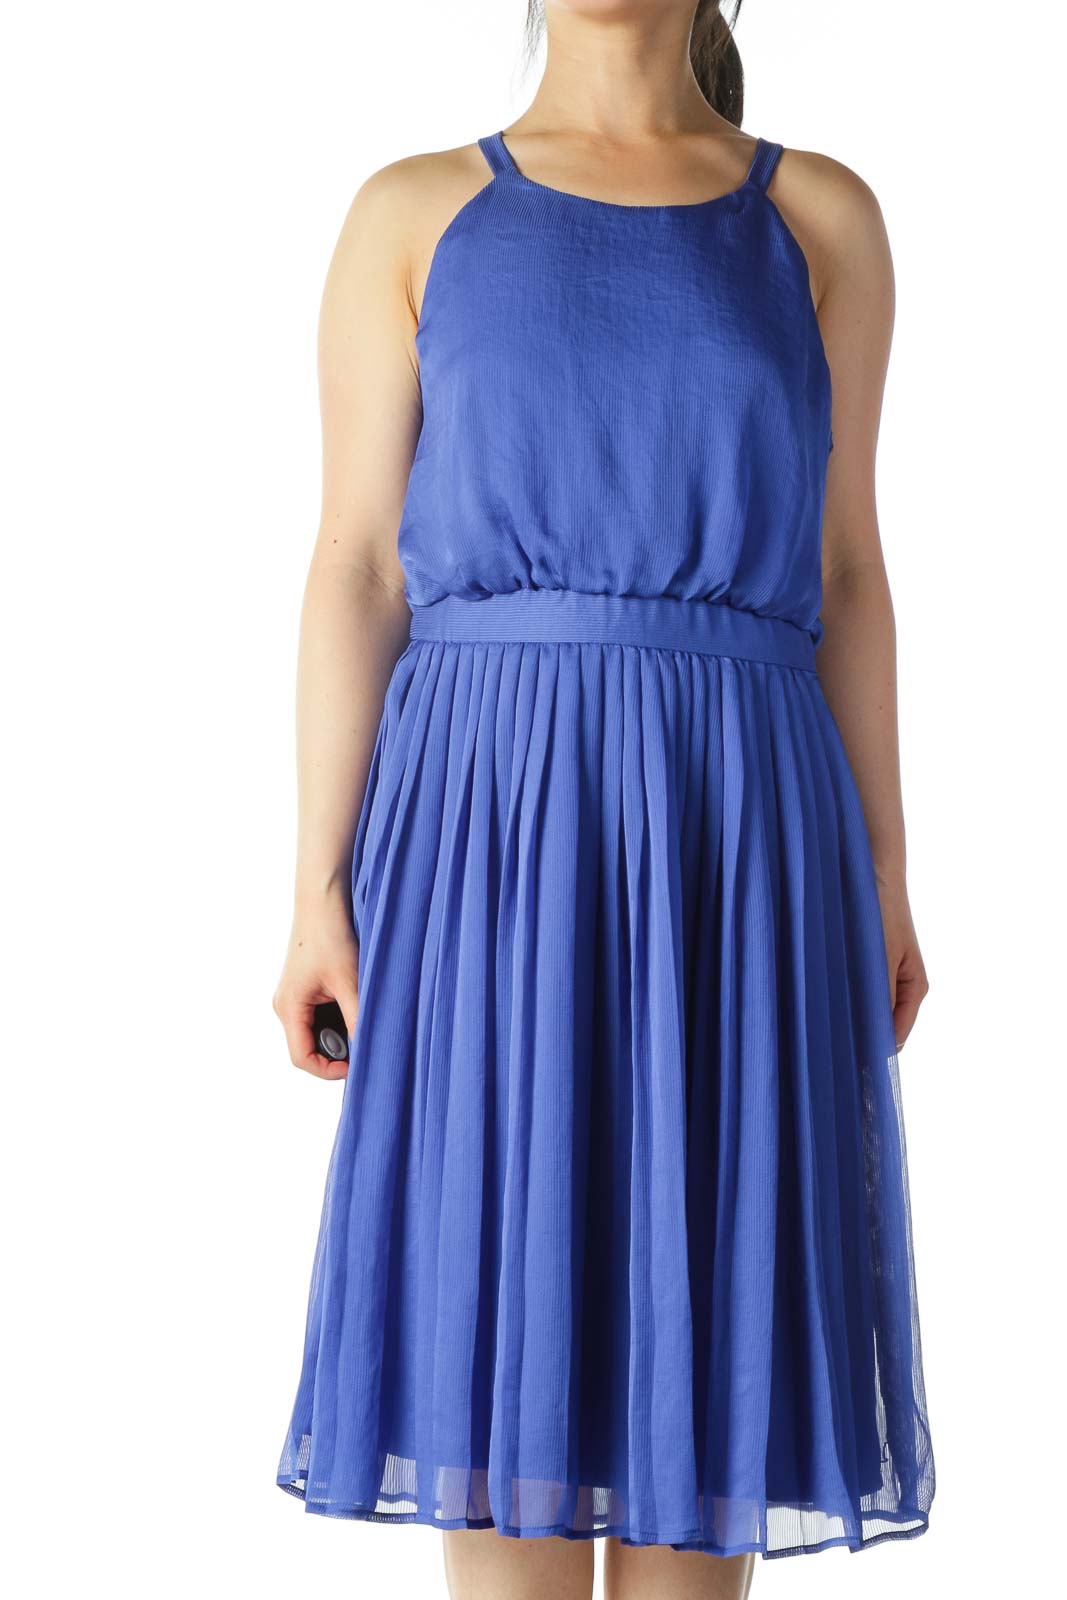 Electric Blue Pleated Textured A-Line Dress Front